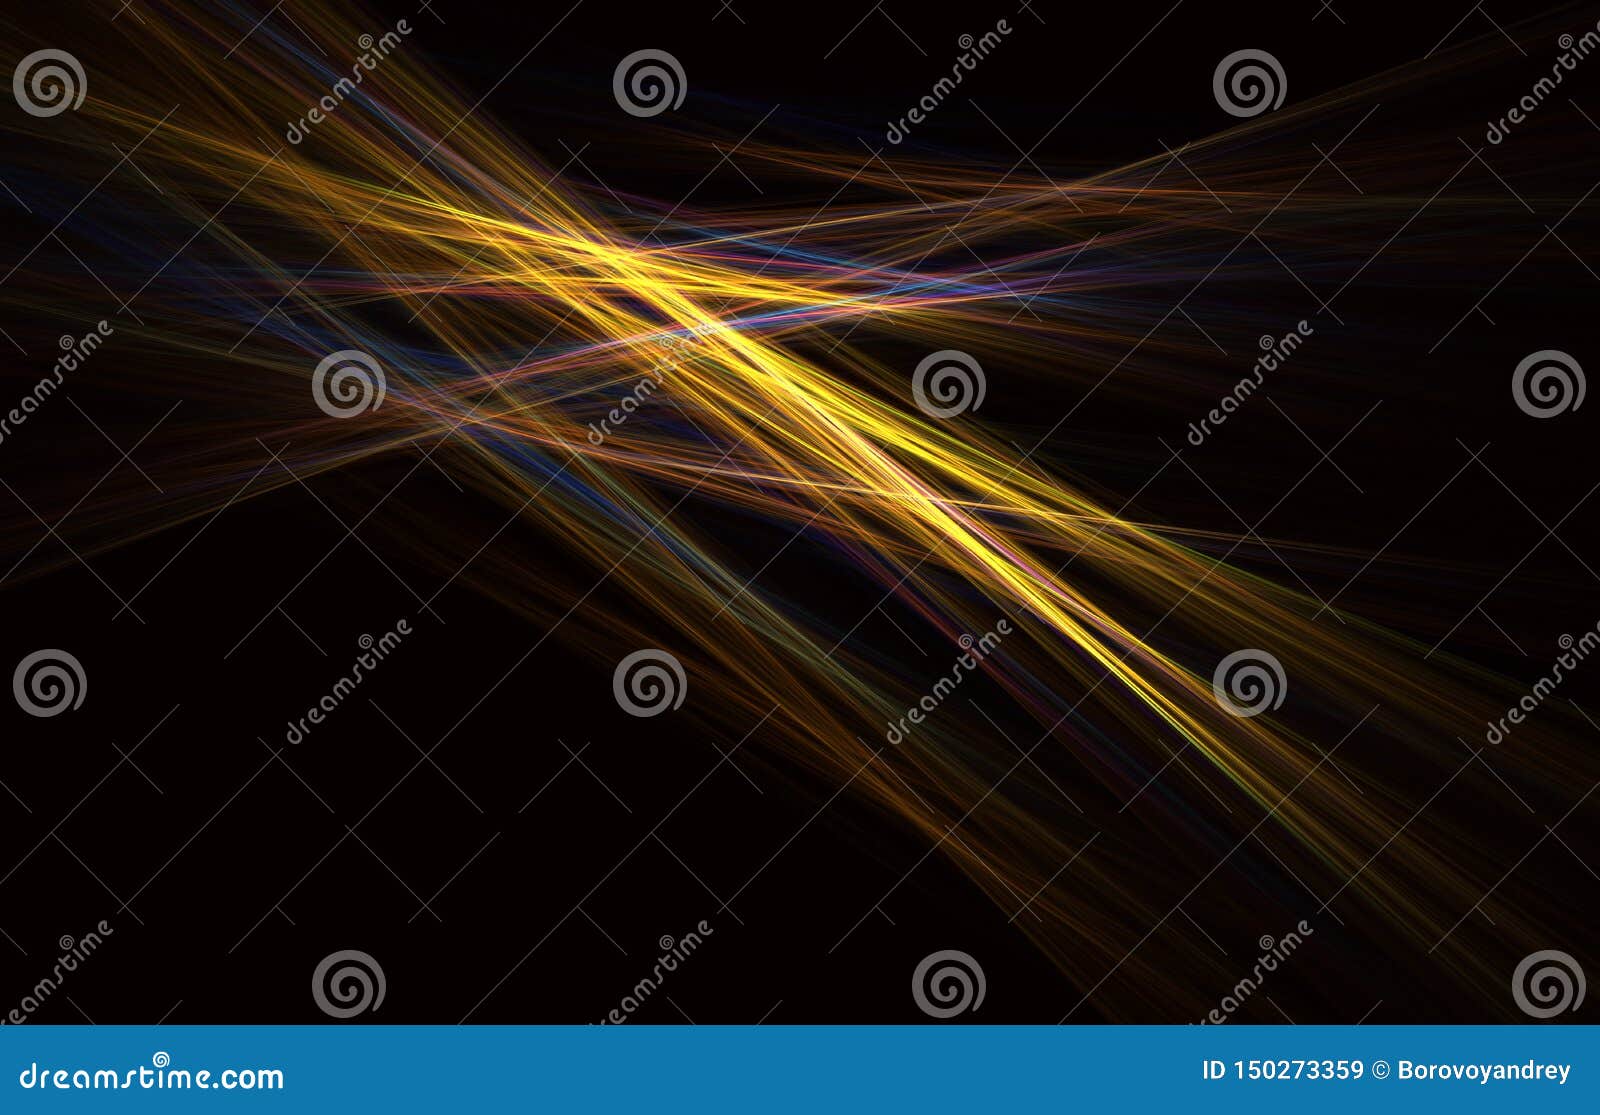 Modern Glowing Shape Design. Energetic Light Tracks and Effects Stock ...